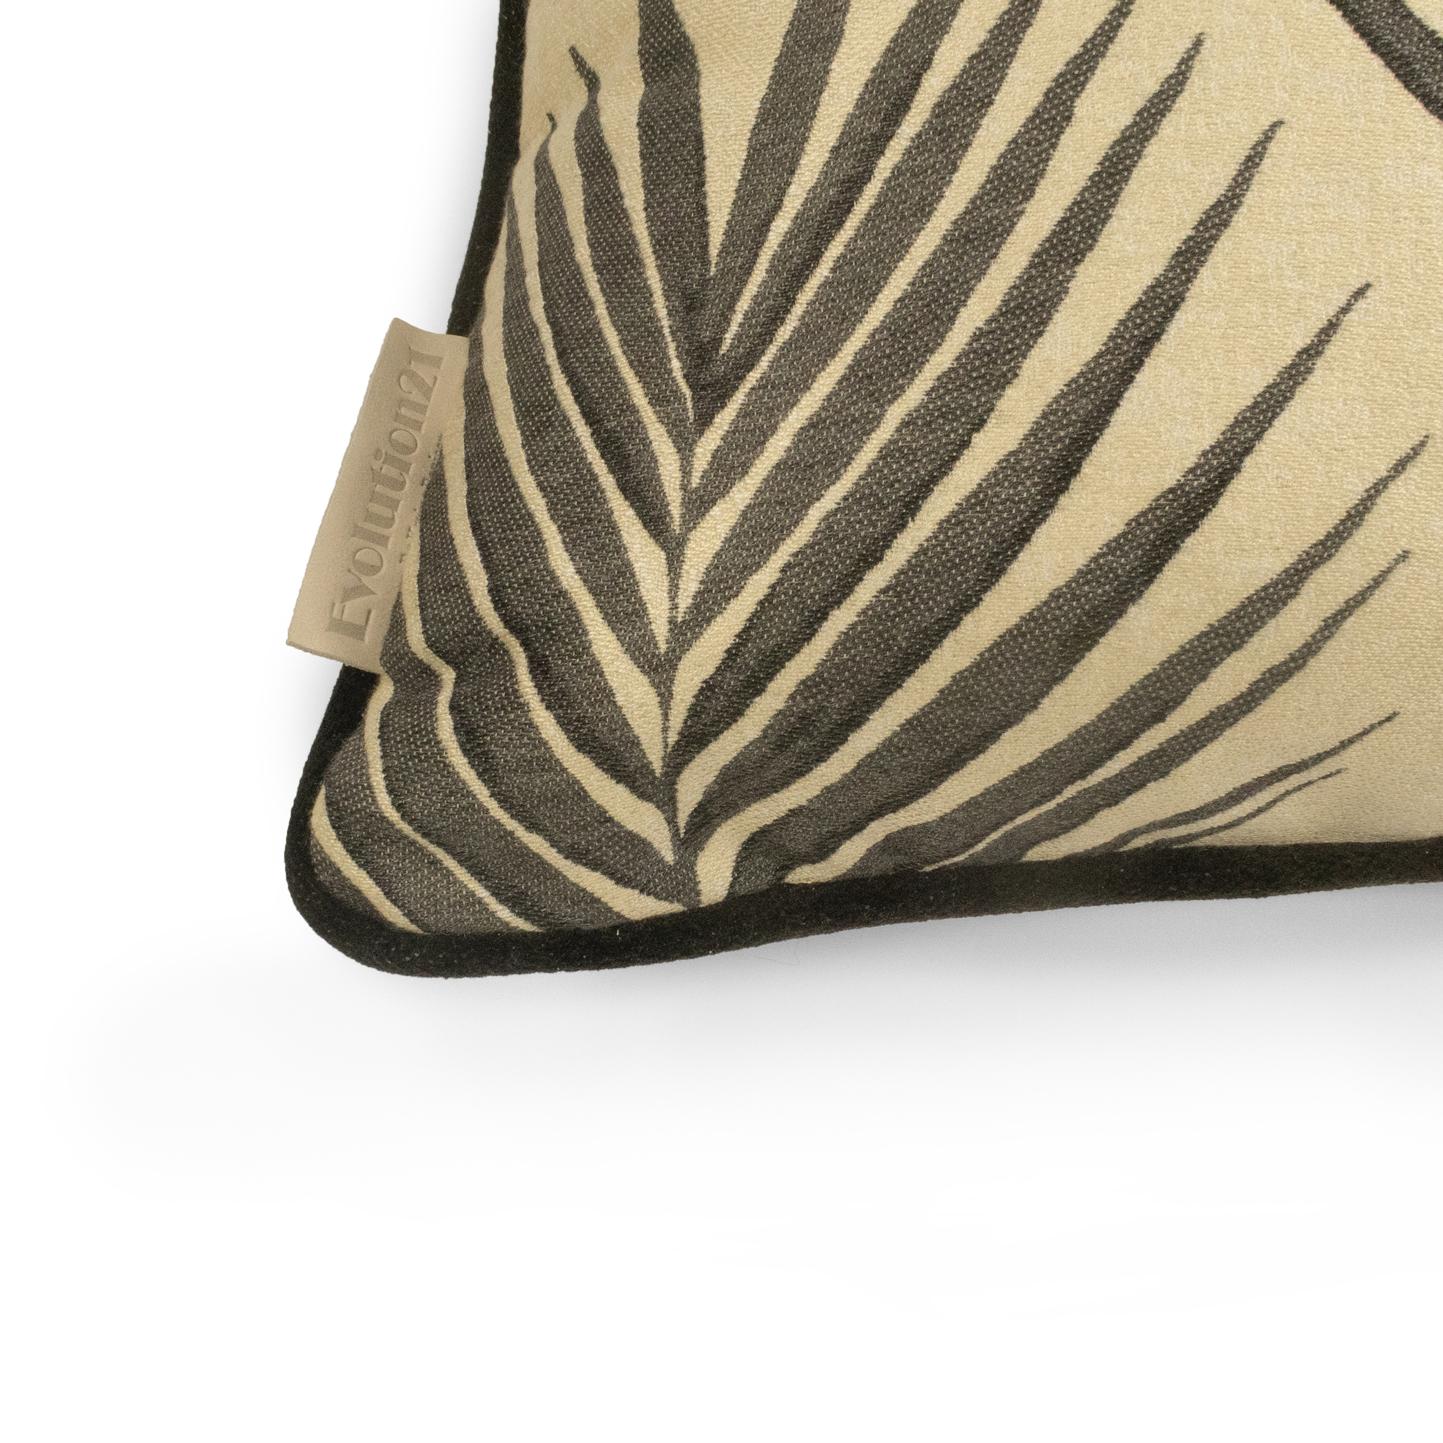 A tropical pattern in subtle tones, our Bamboo Leaf fabric upholstery is warm and playful. Harking to a different environment, the cushion helps to bring a natural look to both interior and exterior settings. 

Pick out similar colours in